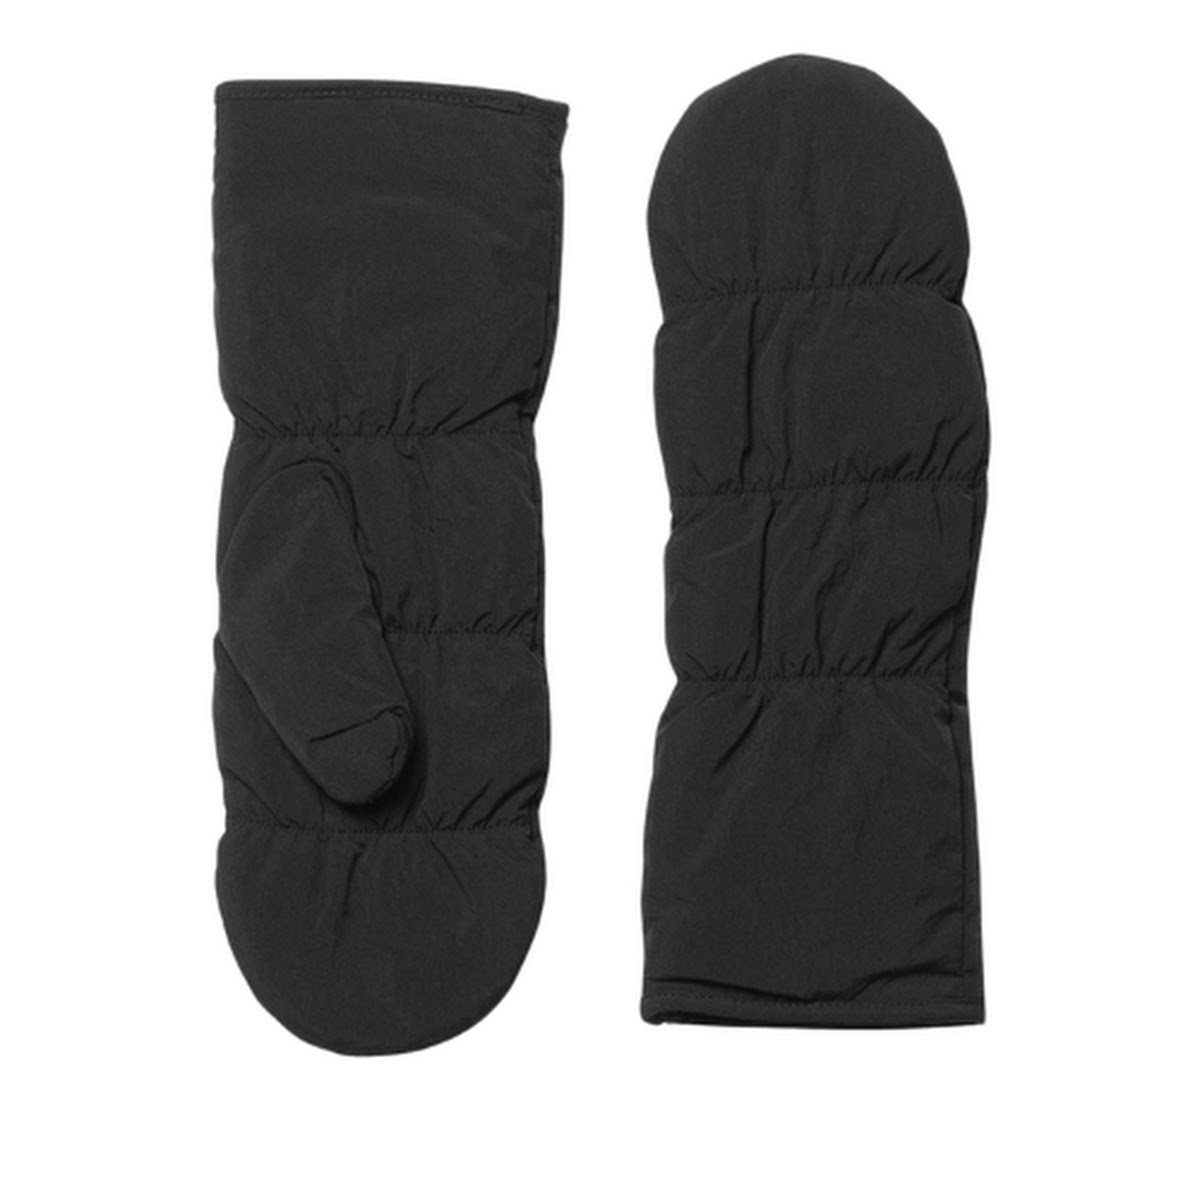 Weekday Padded Mittens, €25